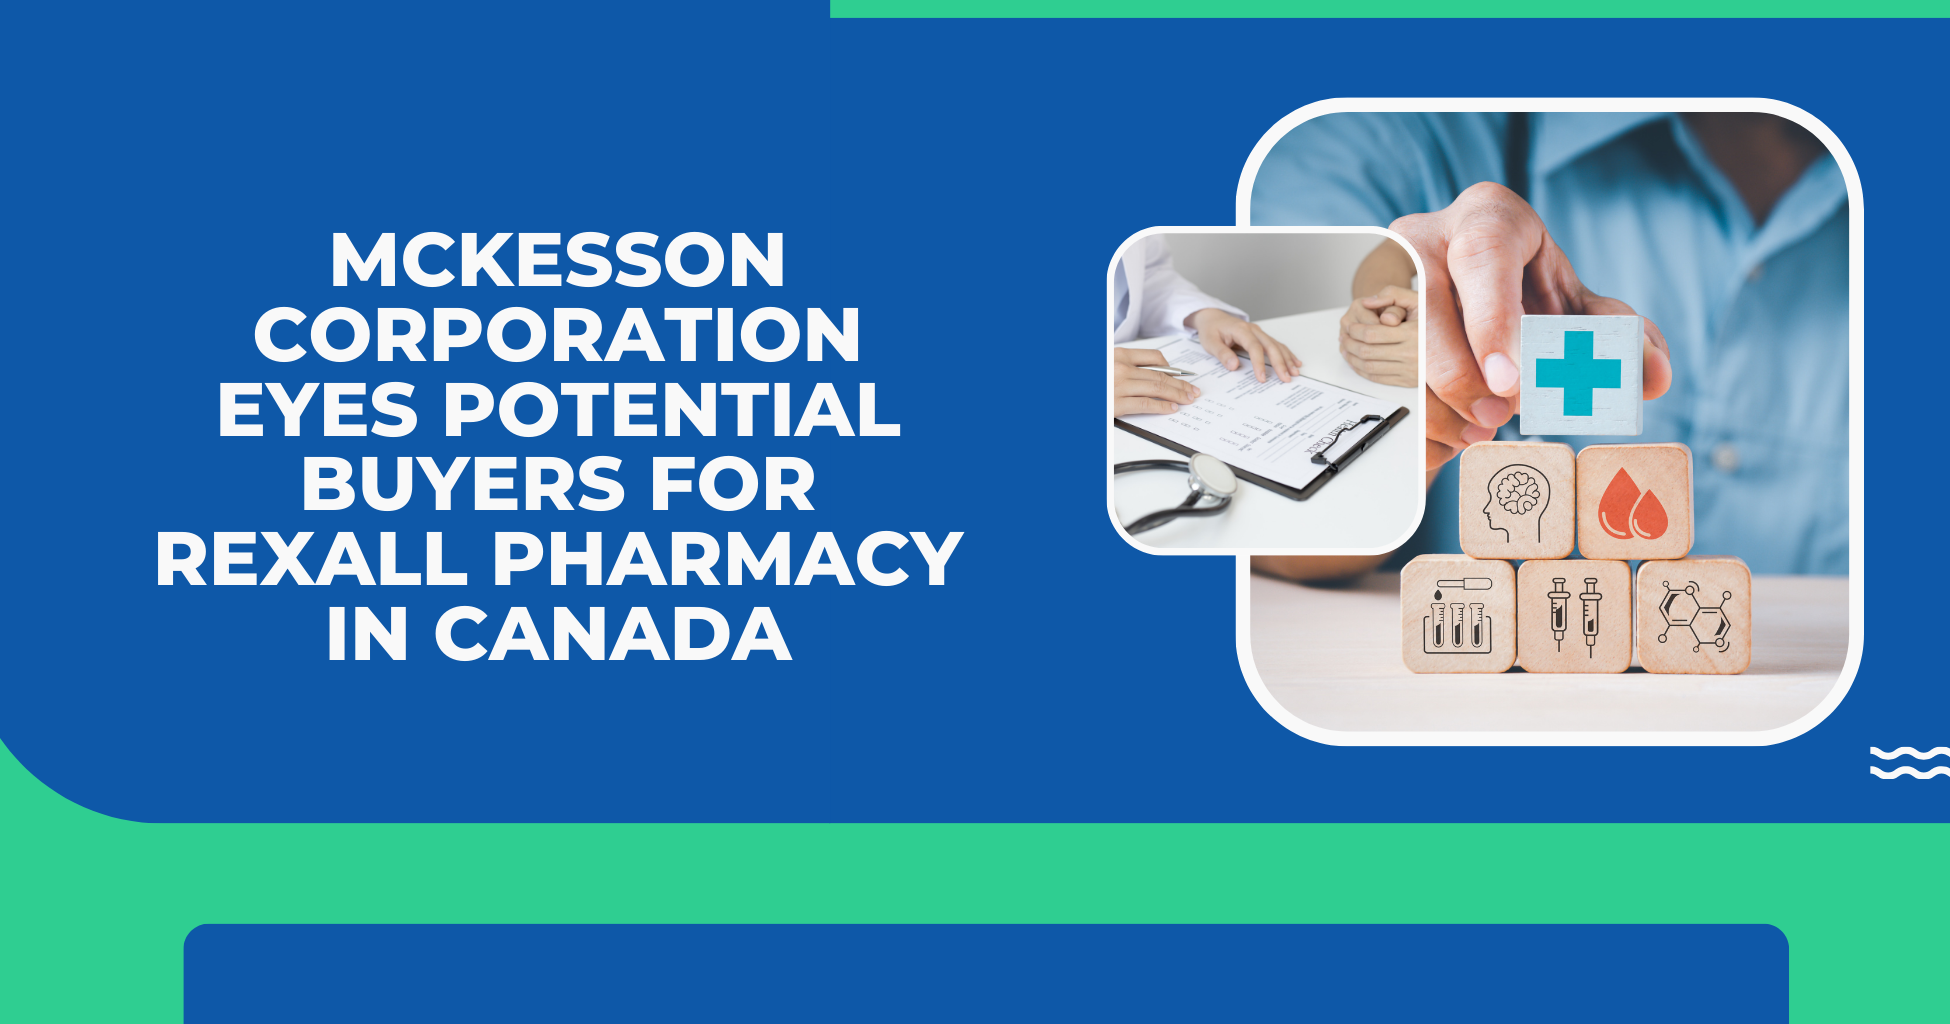 McKesson Corporation Eyes Potential Buyers for Rexall Pharmacy in Canada